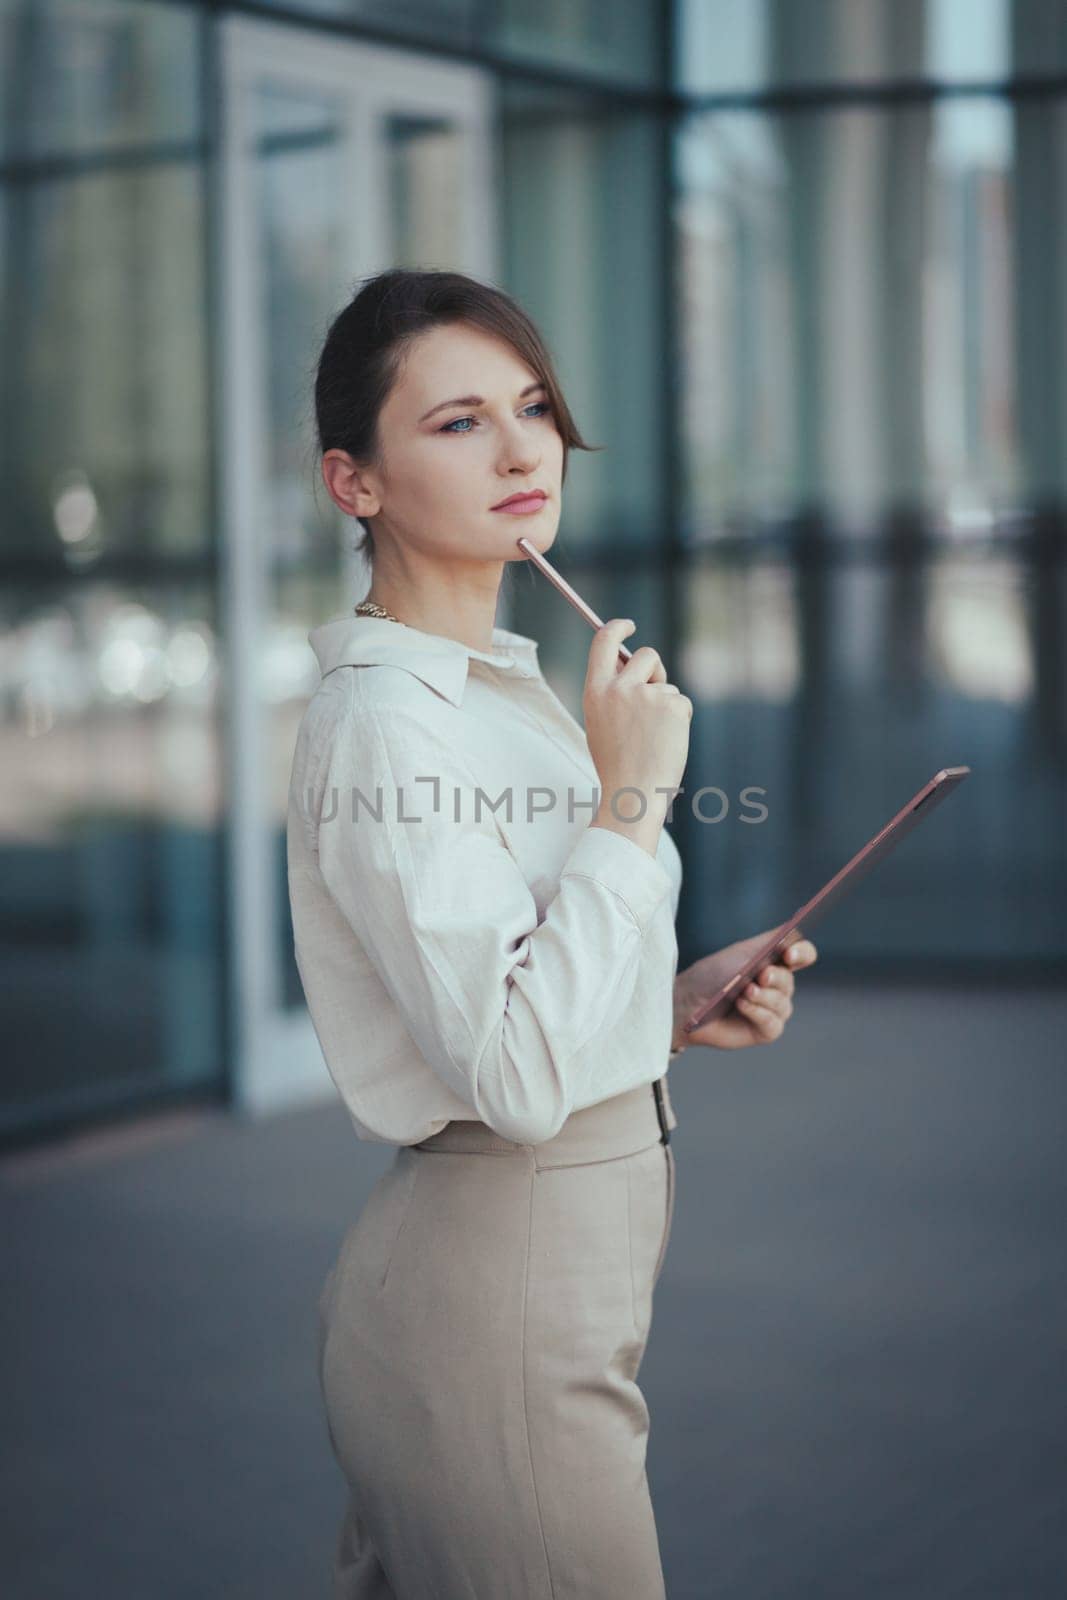 Business portrait of a young caucasian woman with a tablet in her hands against the backdrop of a business center, vertical.